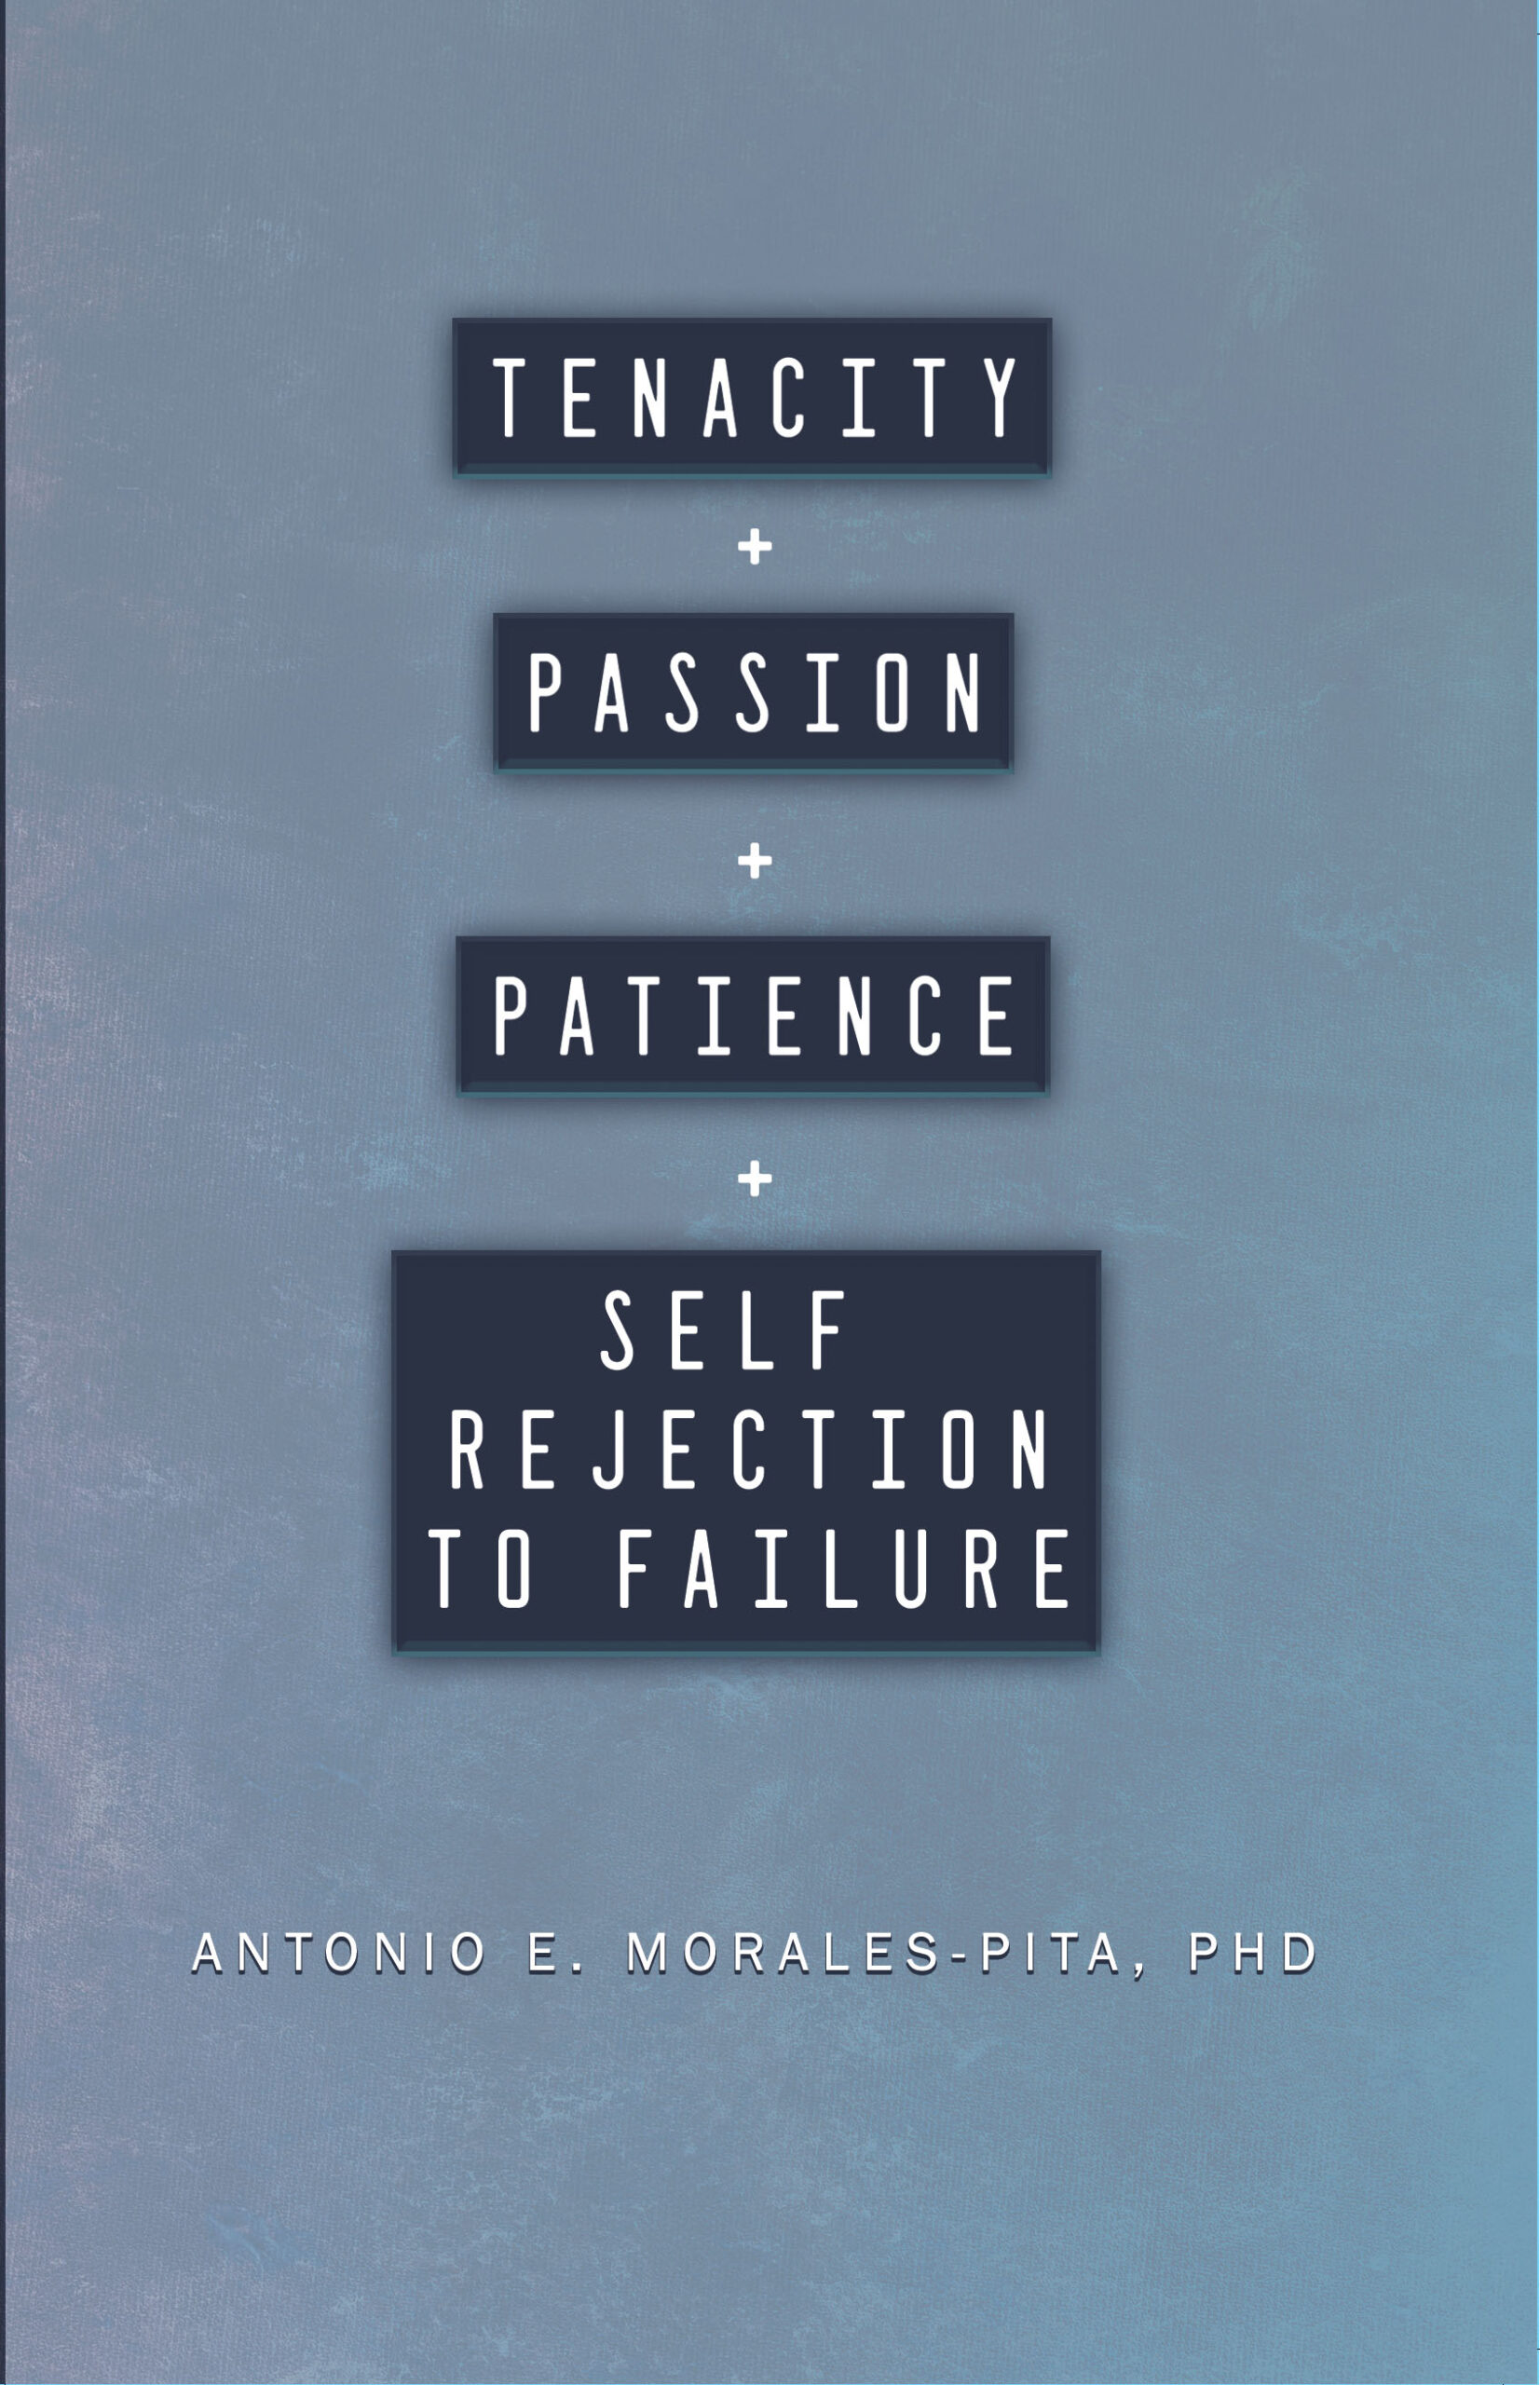 Tenacity + Passion + Patience + Self Rejection to Failure